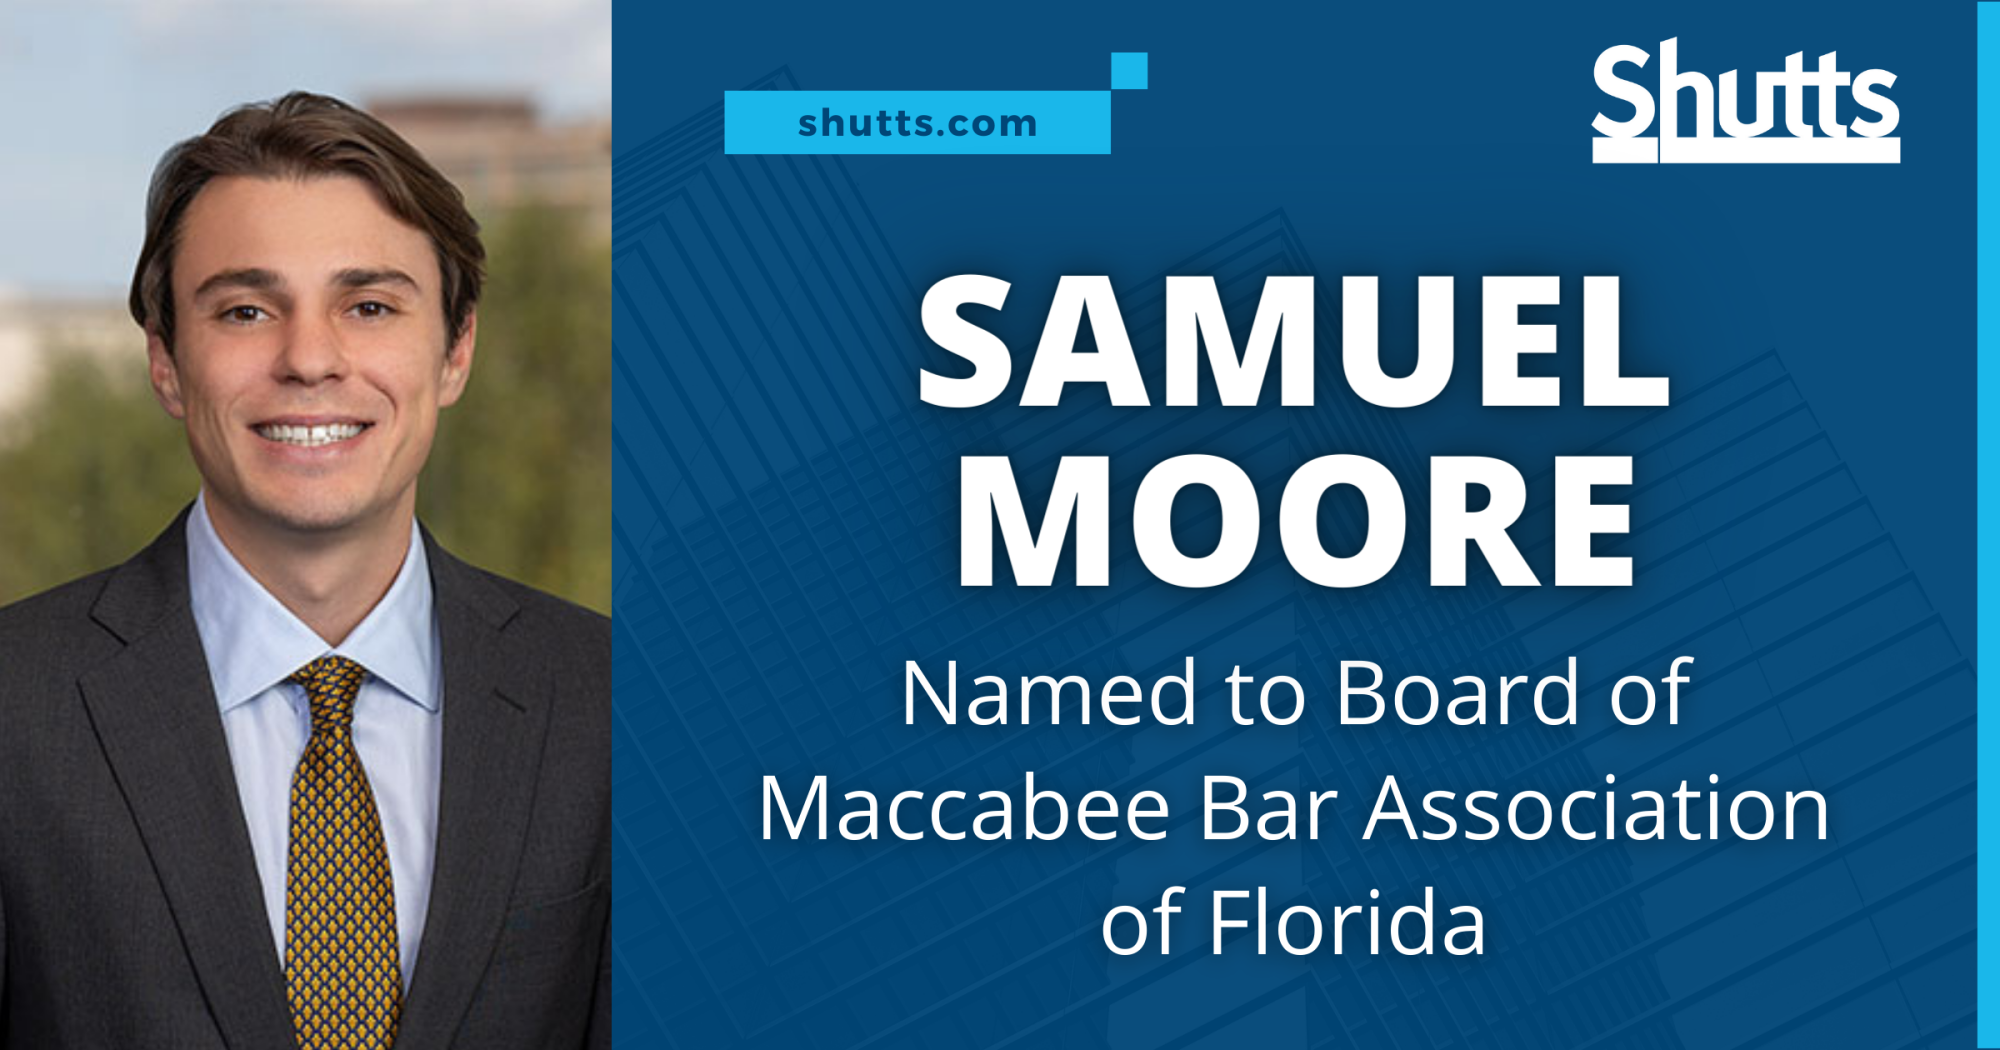 Samuel Moore Named to Board of Maccabee Bar Association of Florida